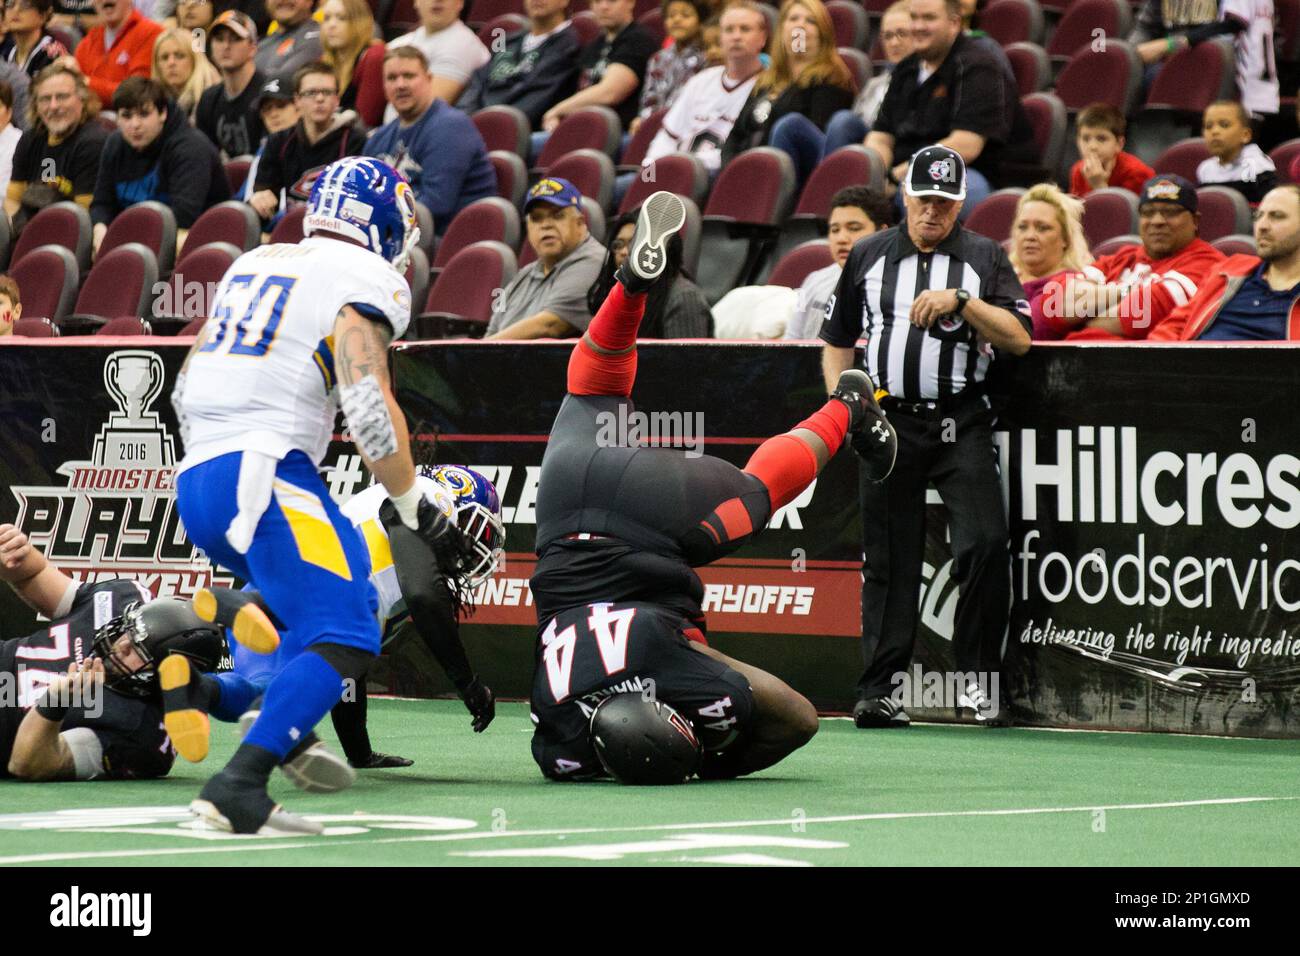 09 April 2016: Cleveland Gladiators DB Joe Powell (21) defends a pass  against Tampa Bay Storm WR Antoine T.T. Toliver (1) and Tampa Bay Storm WR  Phillip Barnett (11) during the first